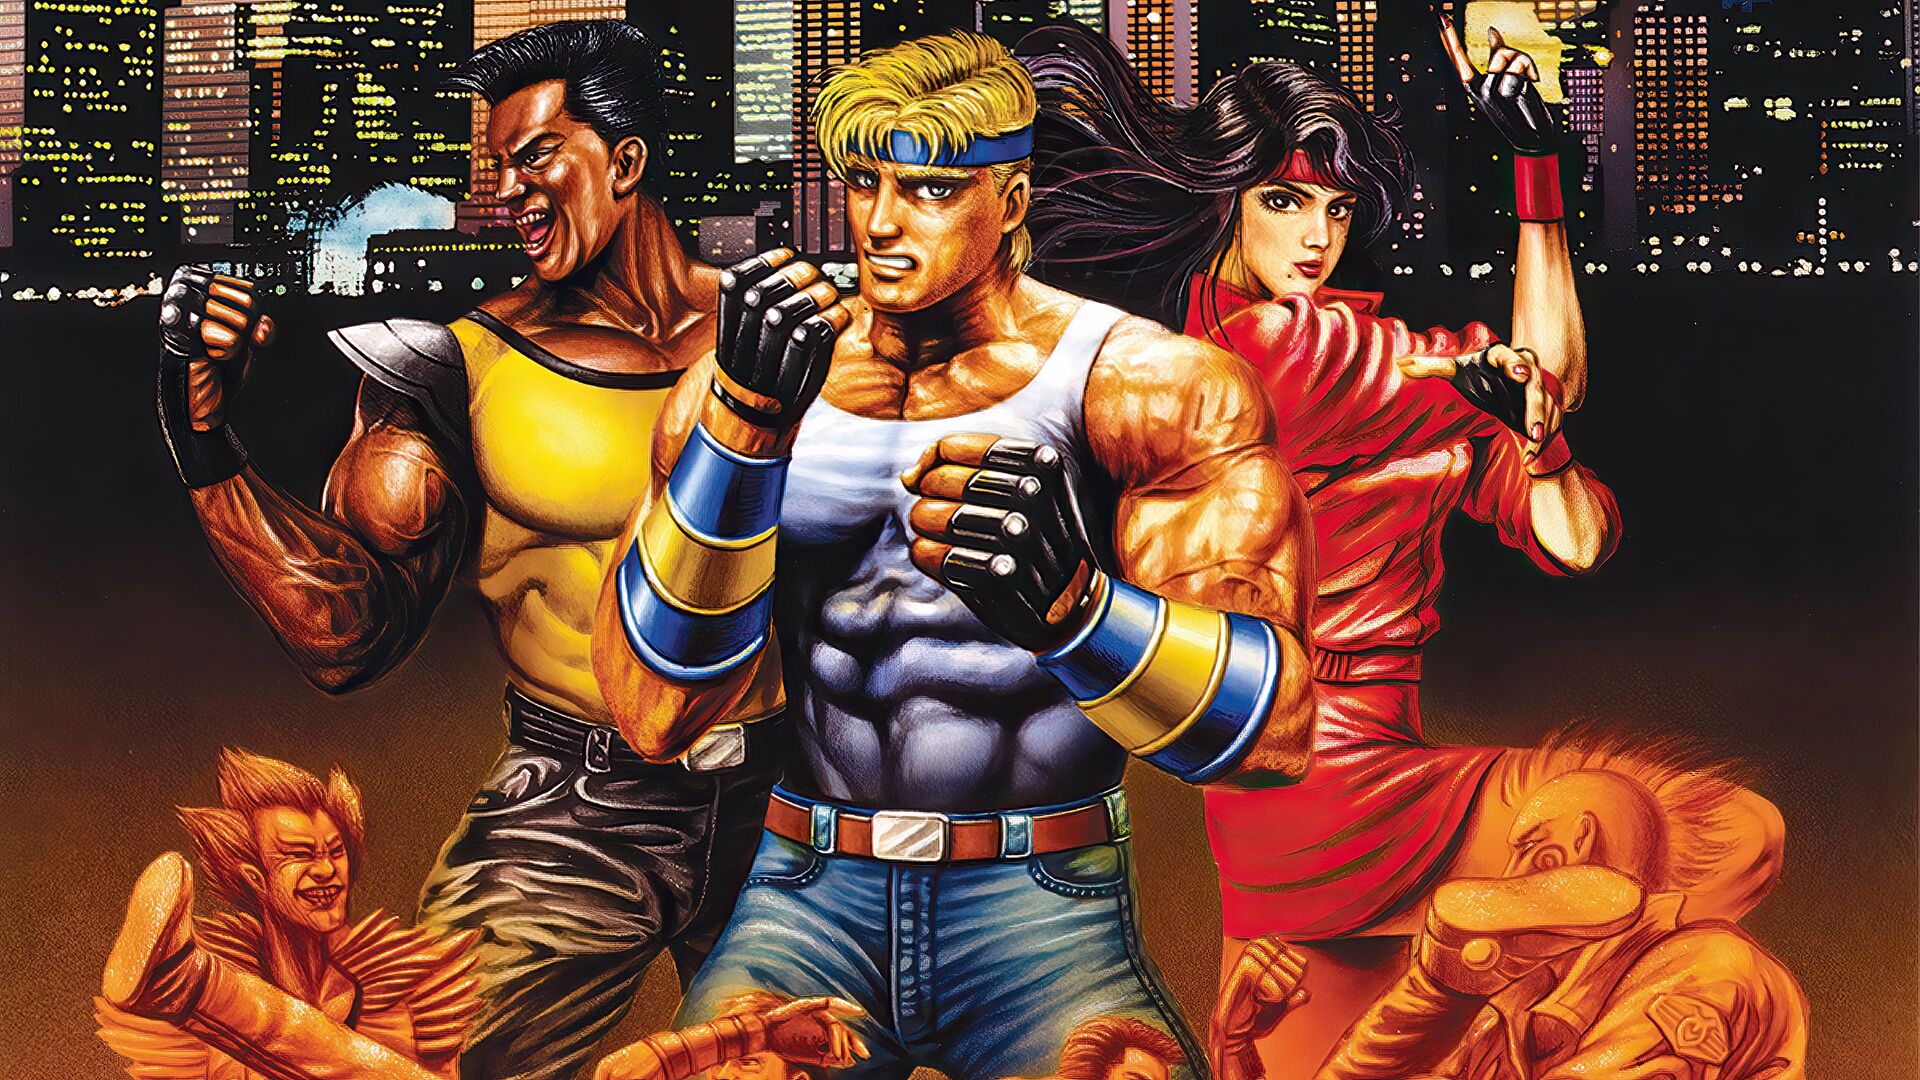 A movie based on Streets of Rage is in the works